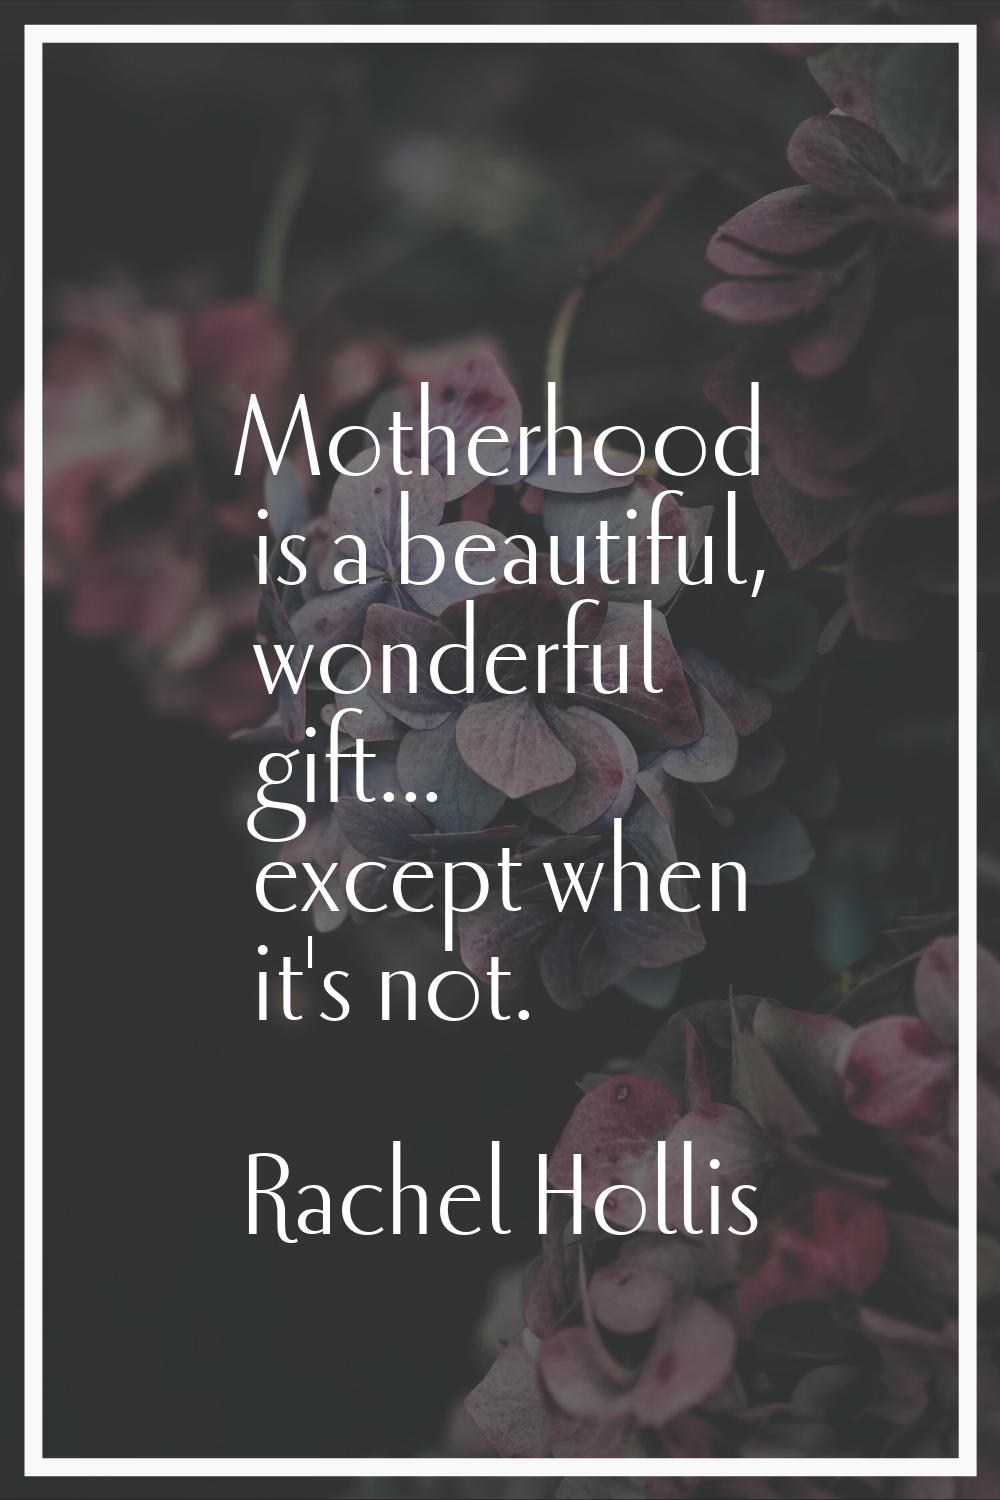 Motherhood is a beautiful, wonderful gift... except when it's not.